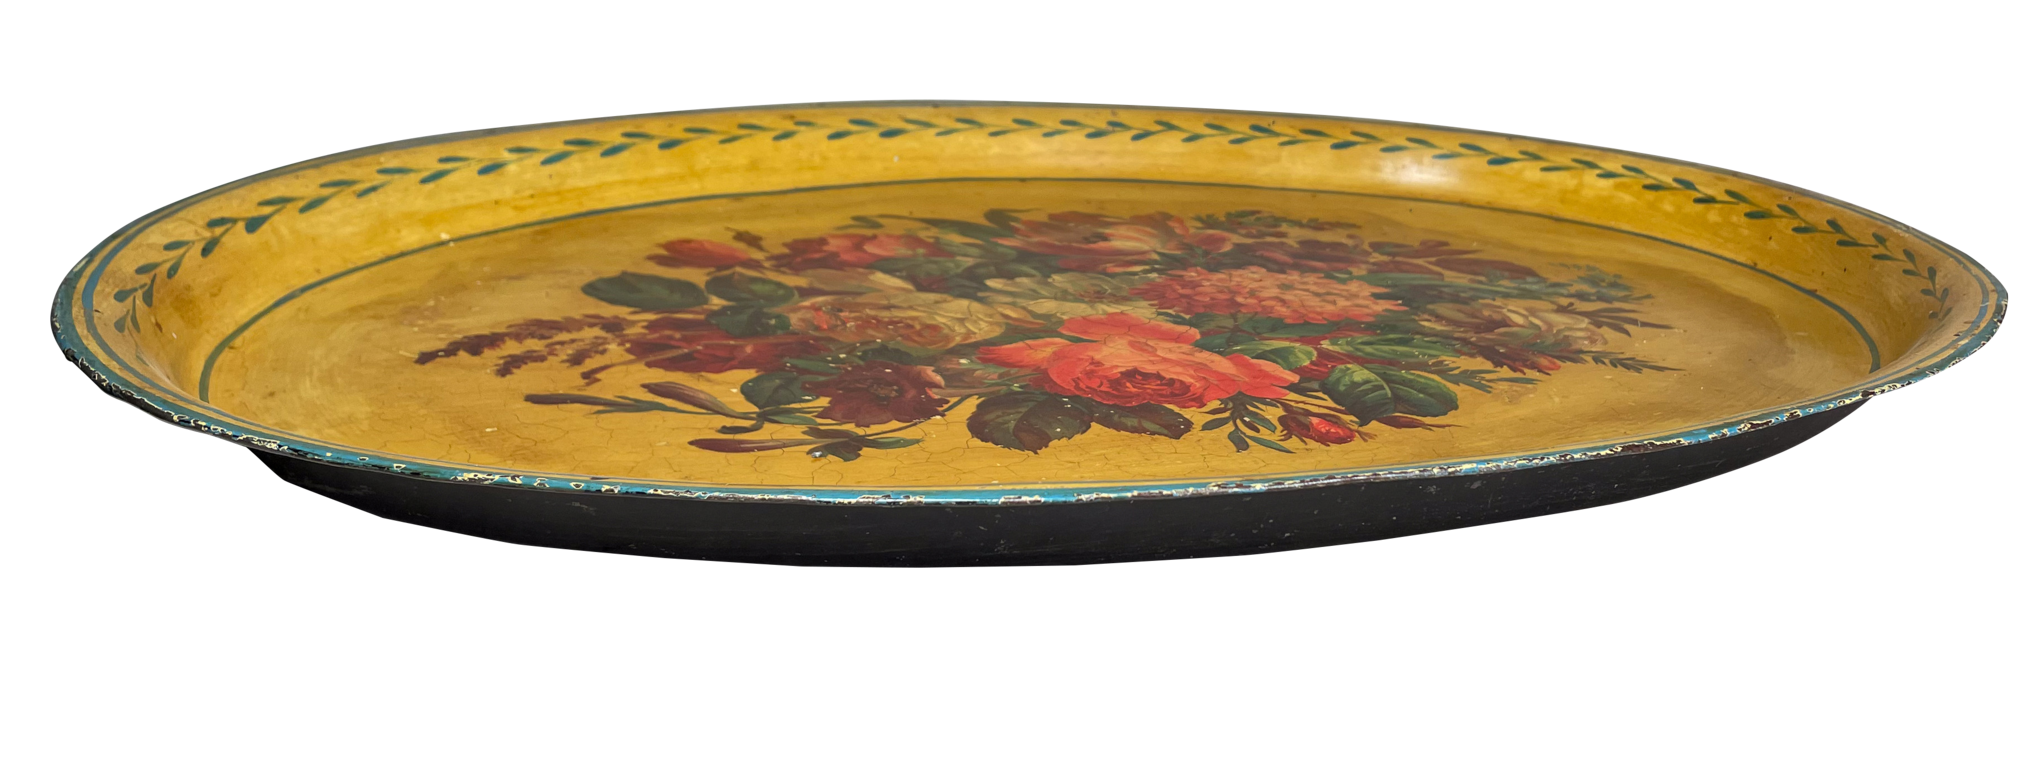 Oval Tole Tray Decorated with a Floral Bouquet